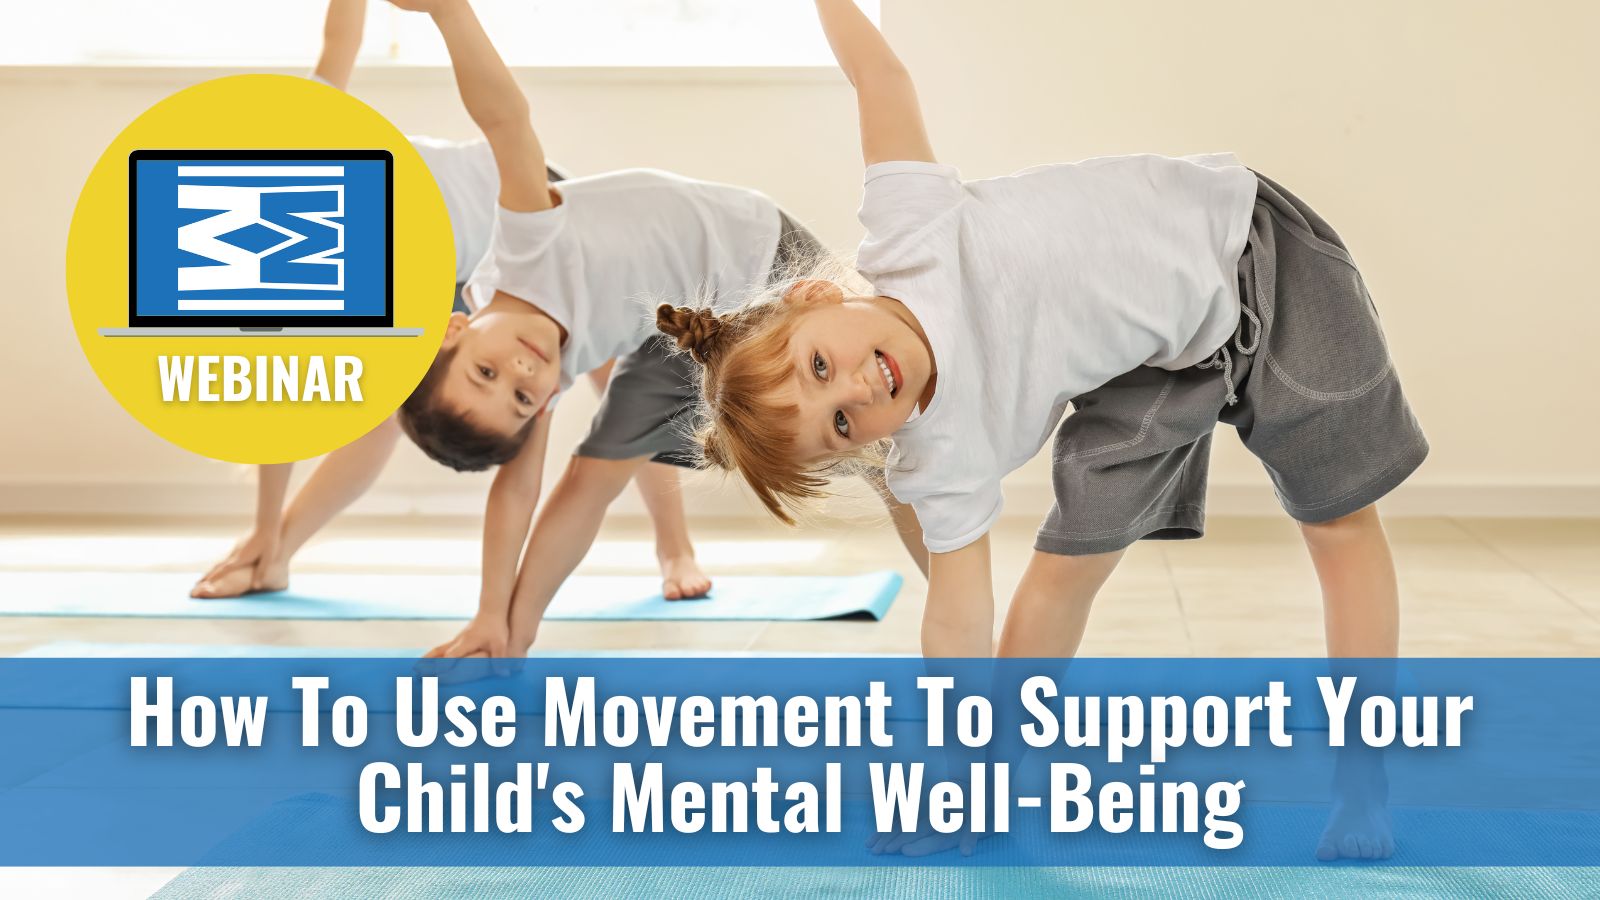 WEBINAR - How To Use Movement To Support Your Child's Mental Well-Being